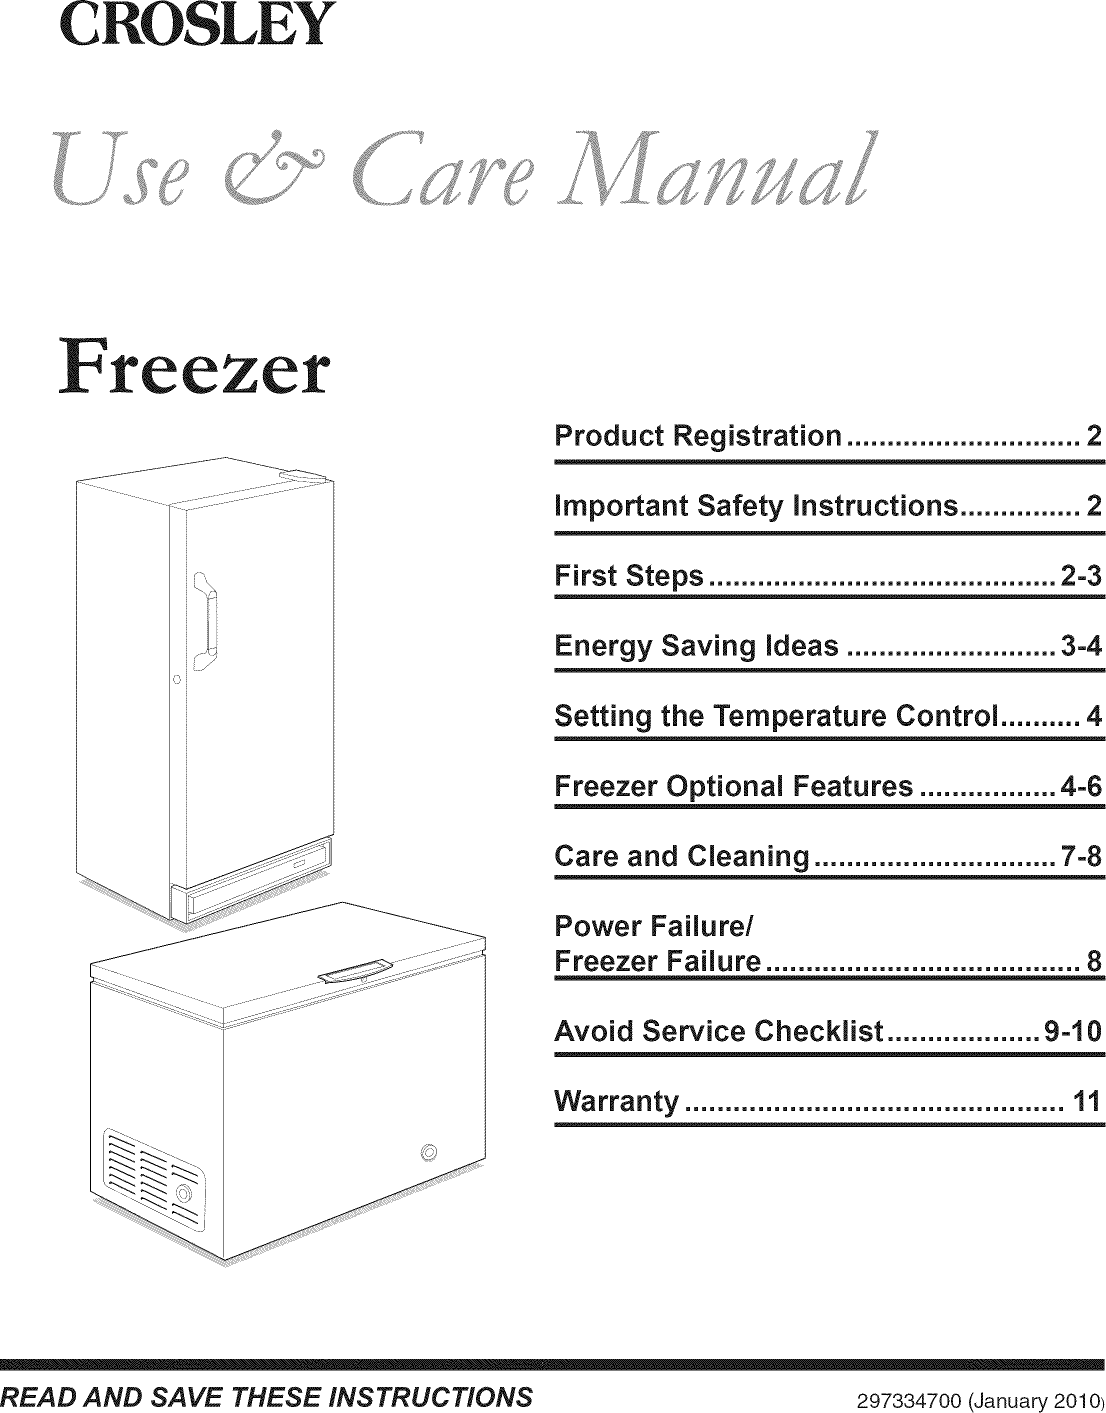 Crosley CFC09LW0 User Manual FREEZER Manuals And Guides L1002466